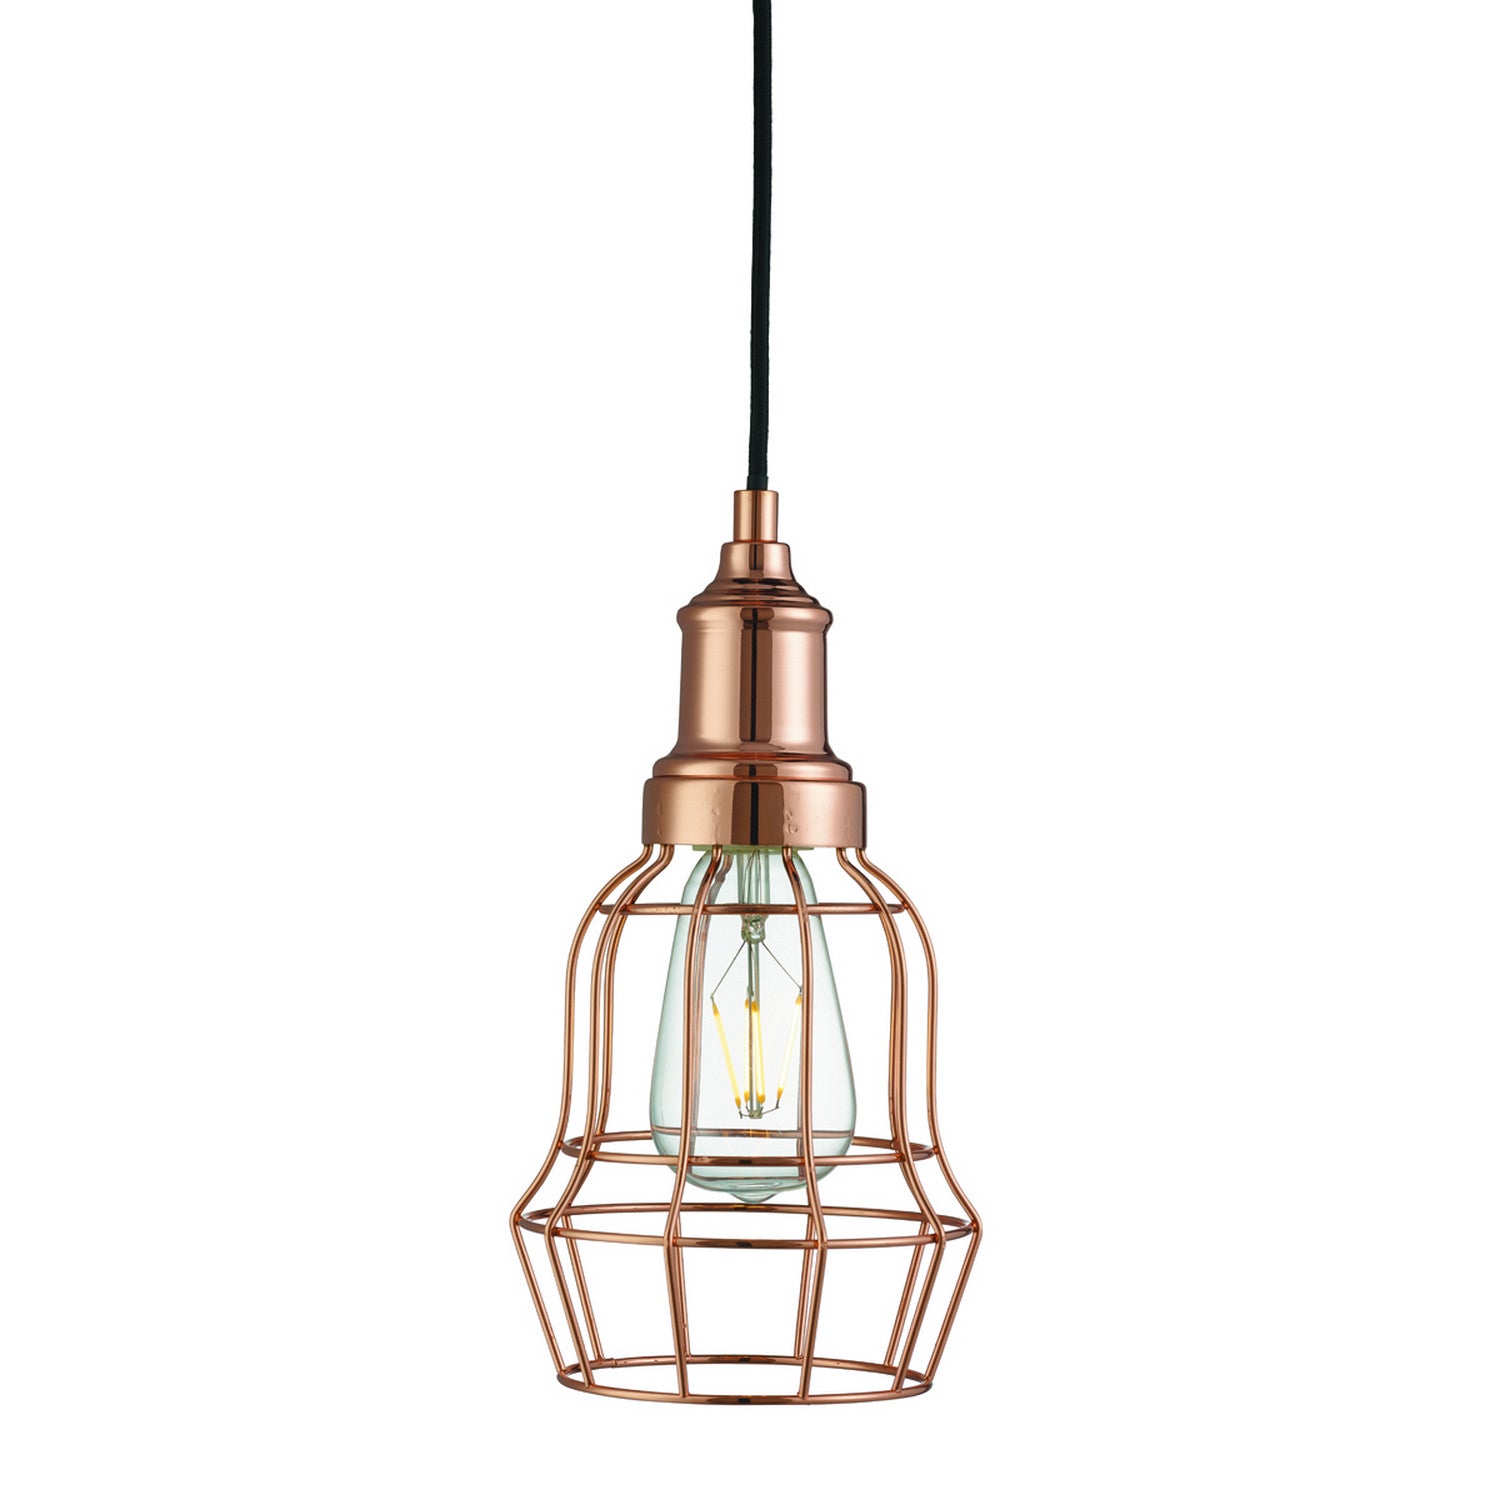 Copper Tapered Cage Shade Ceiling Pendant Light